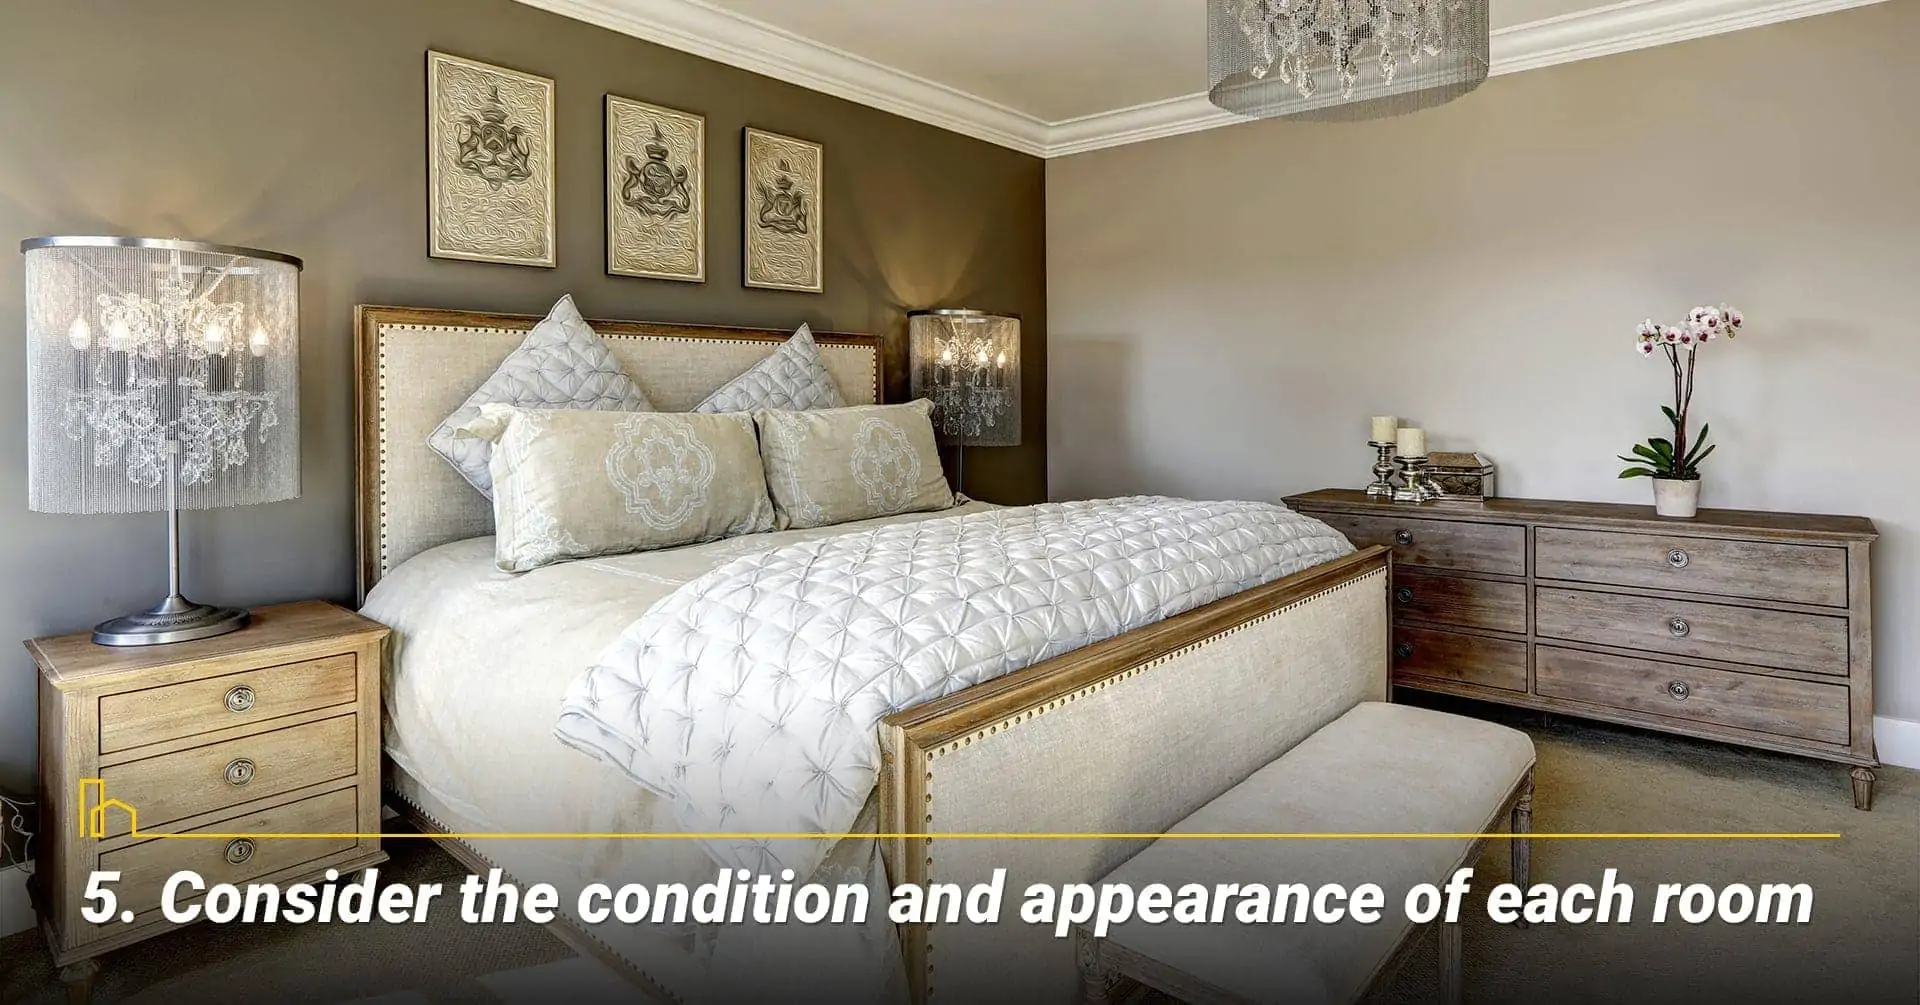 Consider the condition and appearance of each room, upgrade each rooms